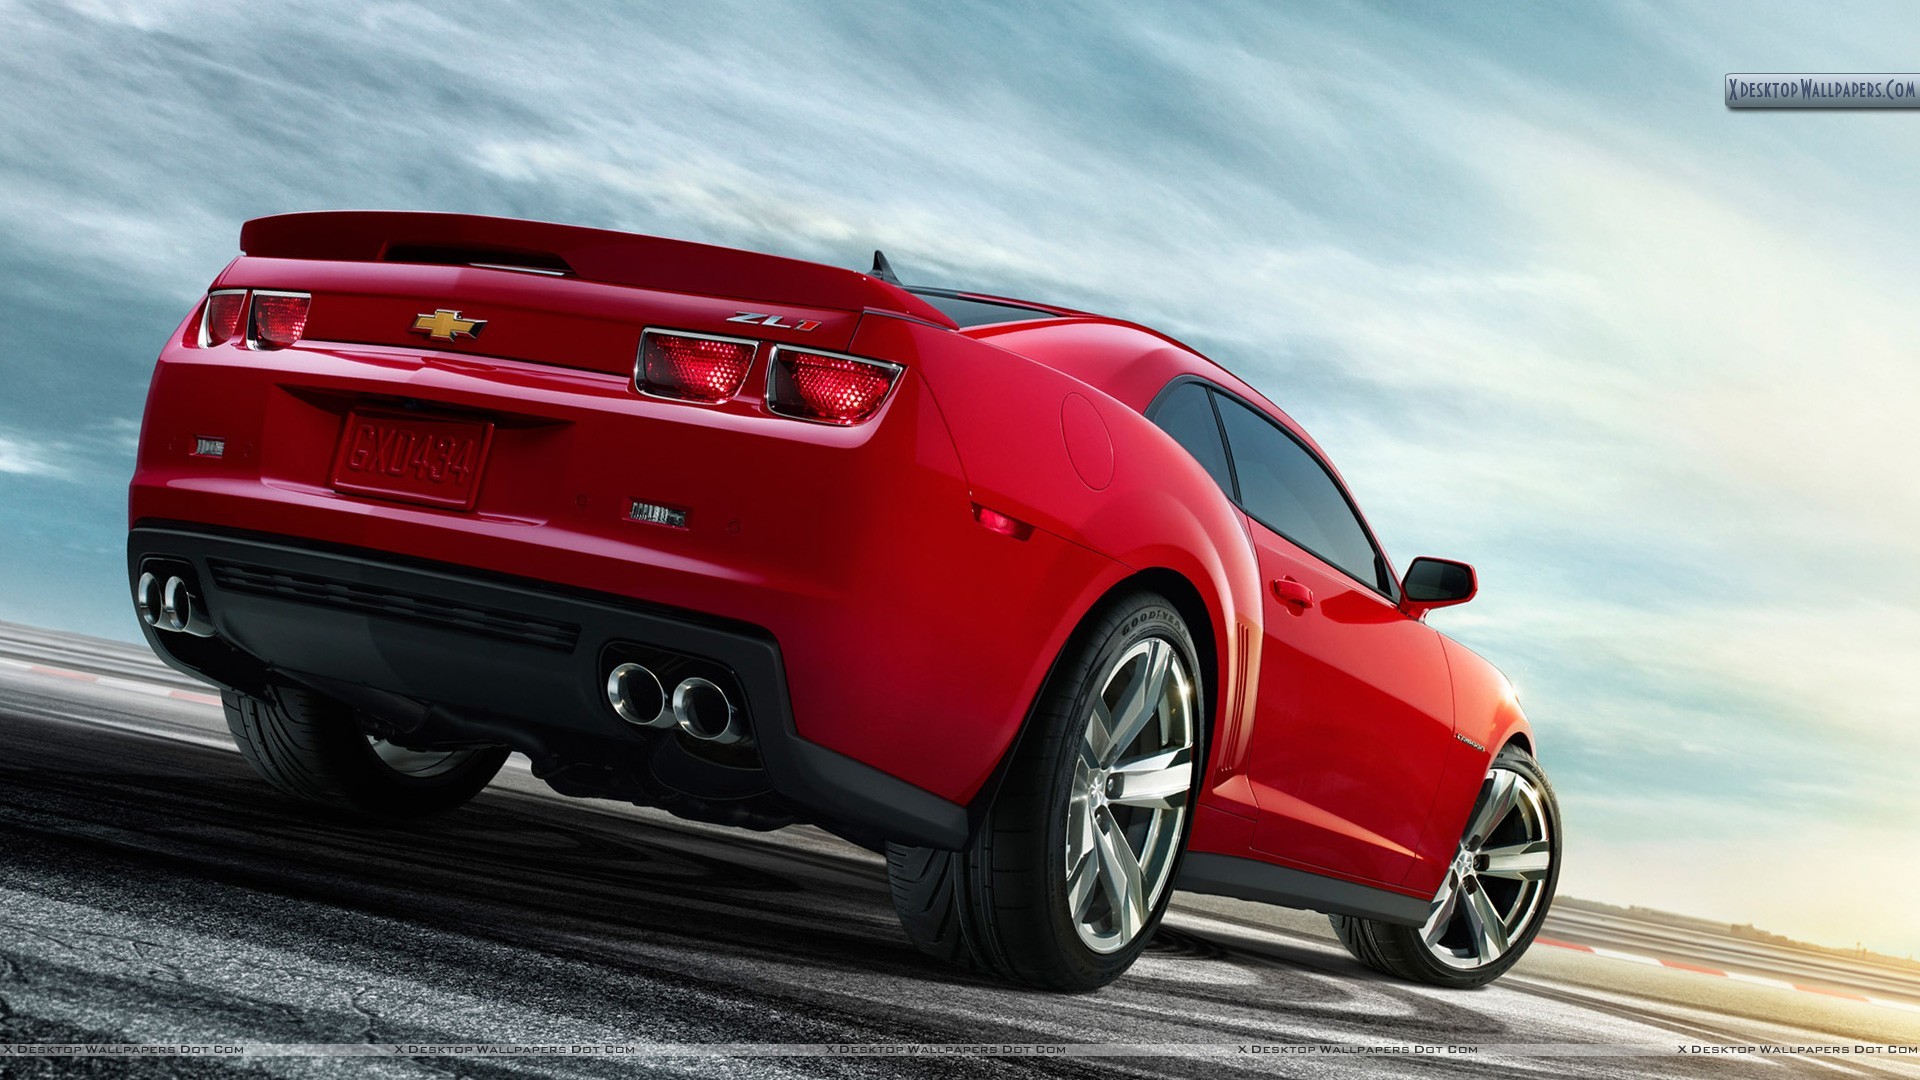 1920x1080 You are viewing wallpaper titled "2012 Chevrolet Camaro ZL1 ...